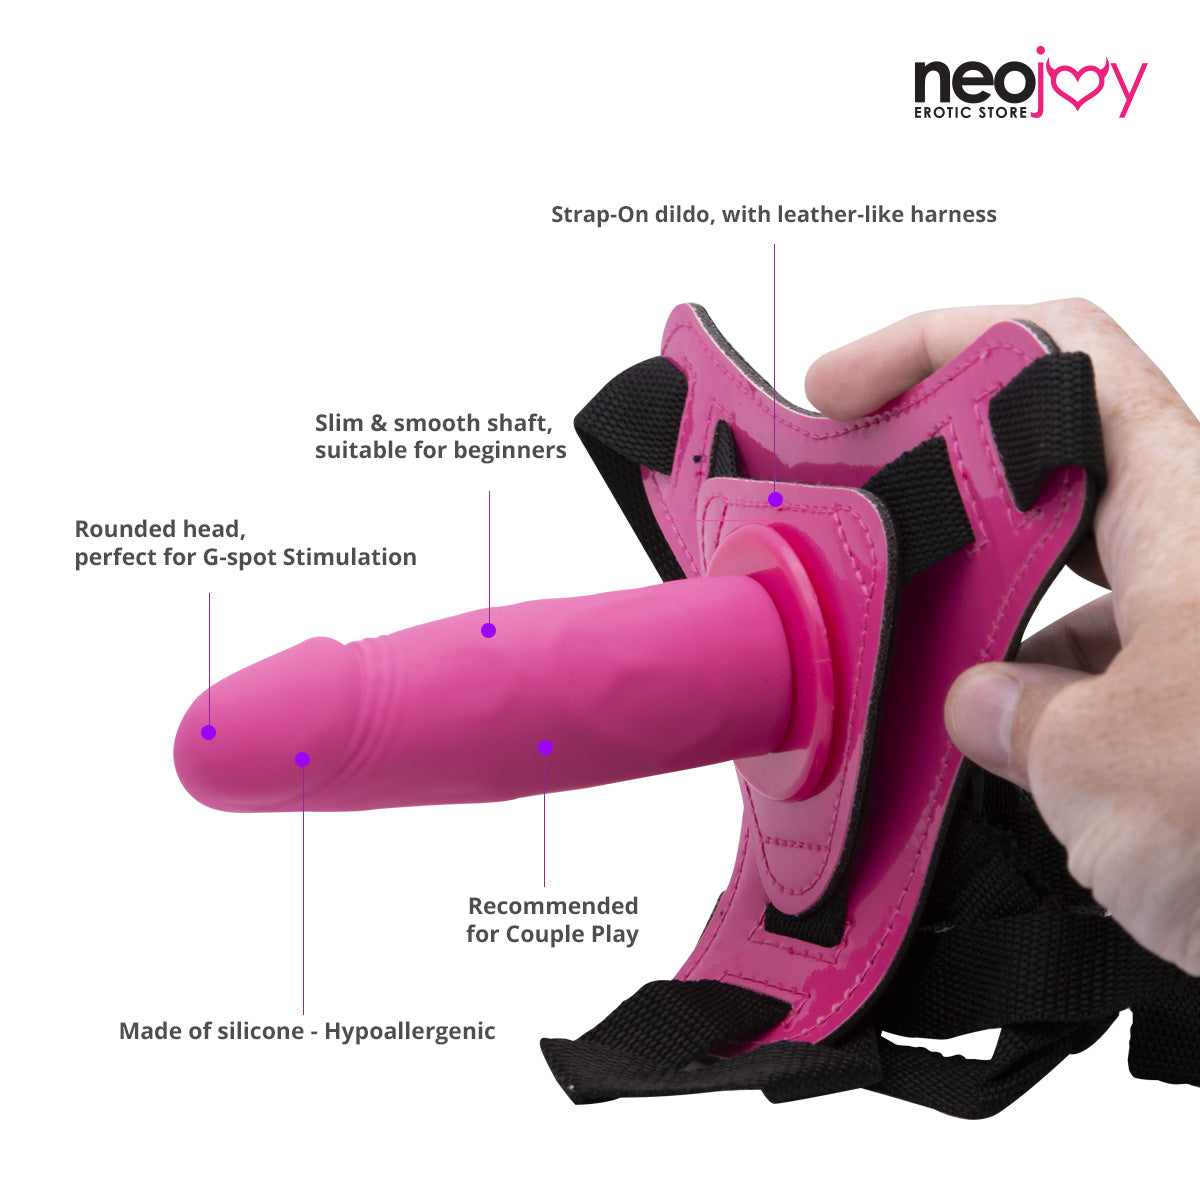 Neojoy Realistic Strap-Ons Dildo TPE with Suction Cup - Pink 4 inch - 11 cm 5